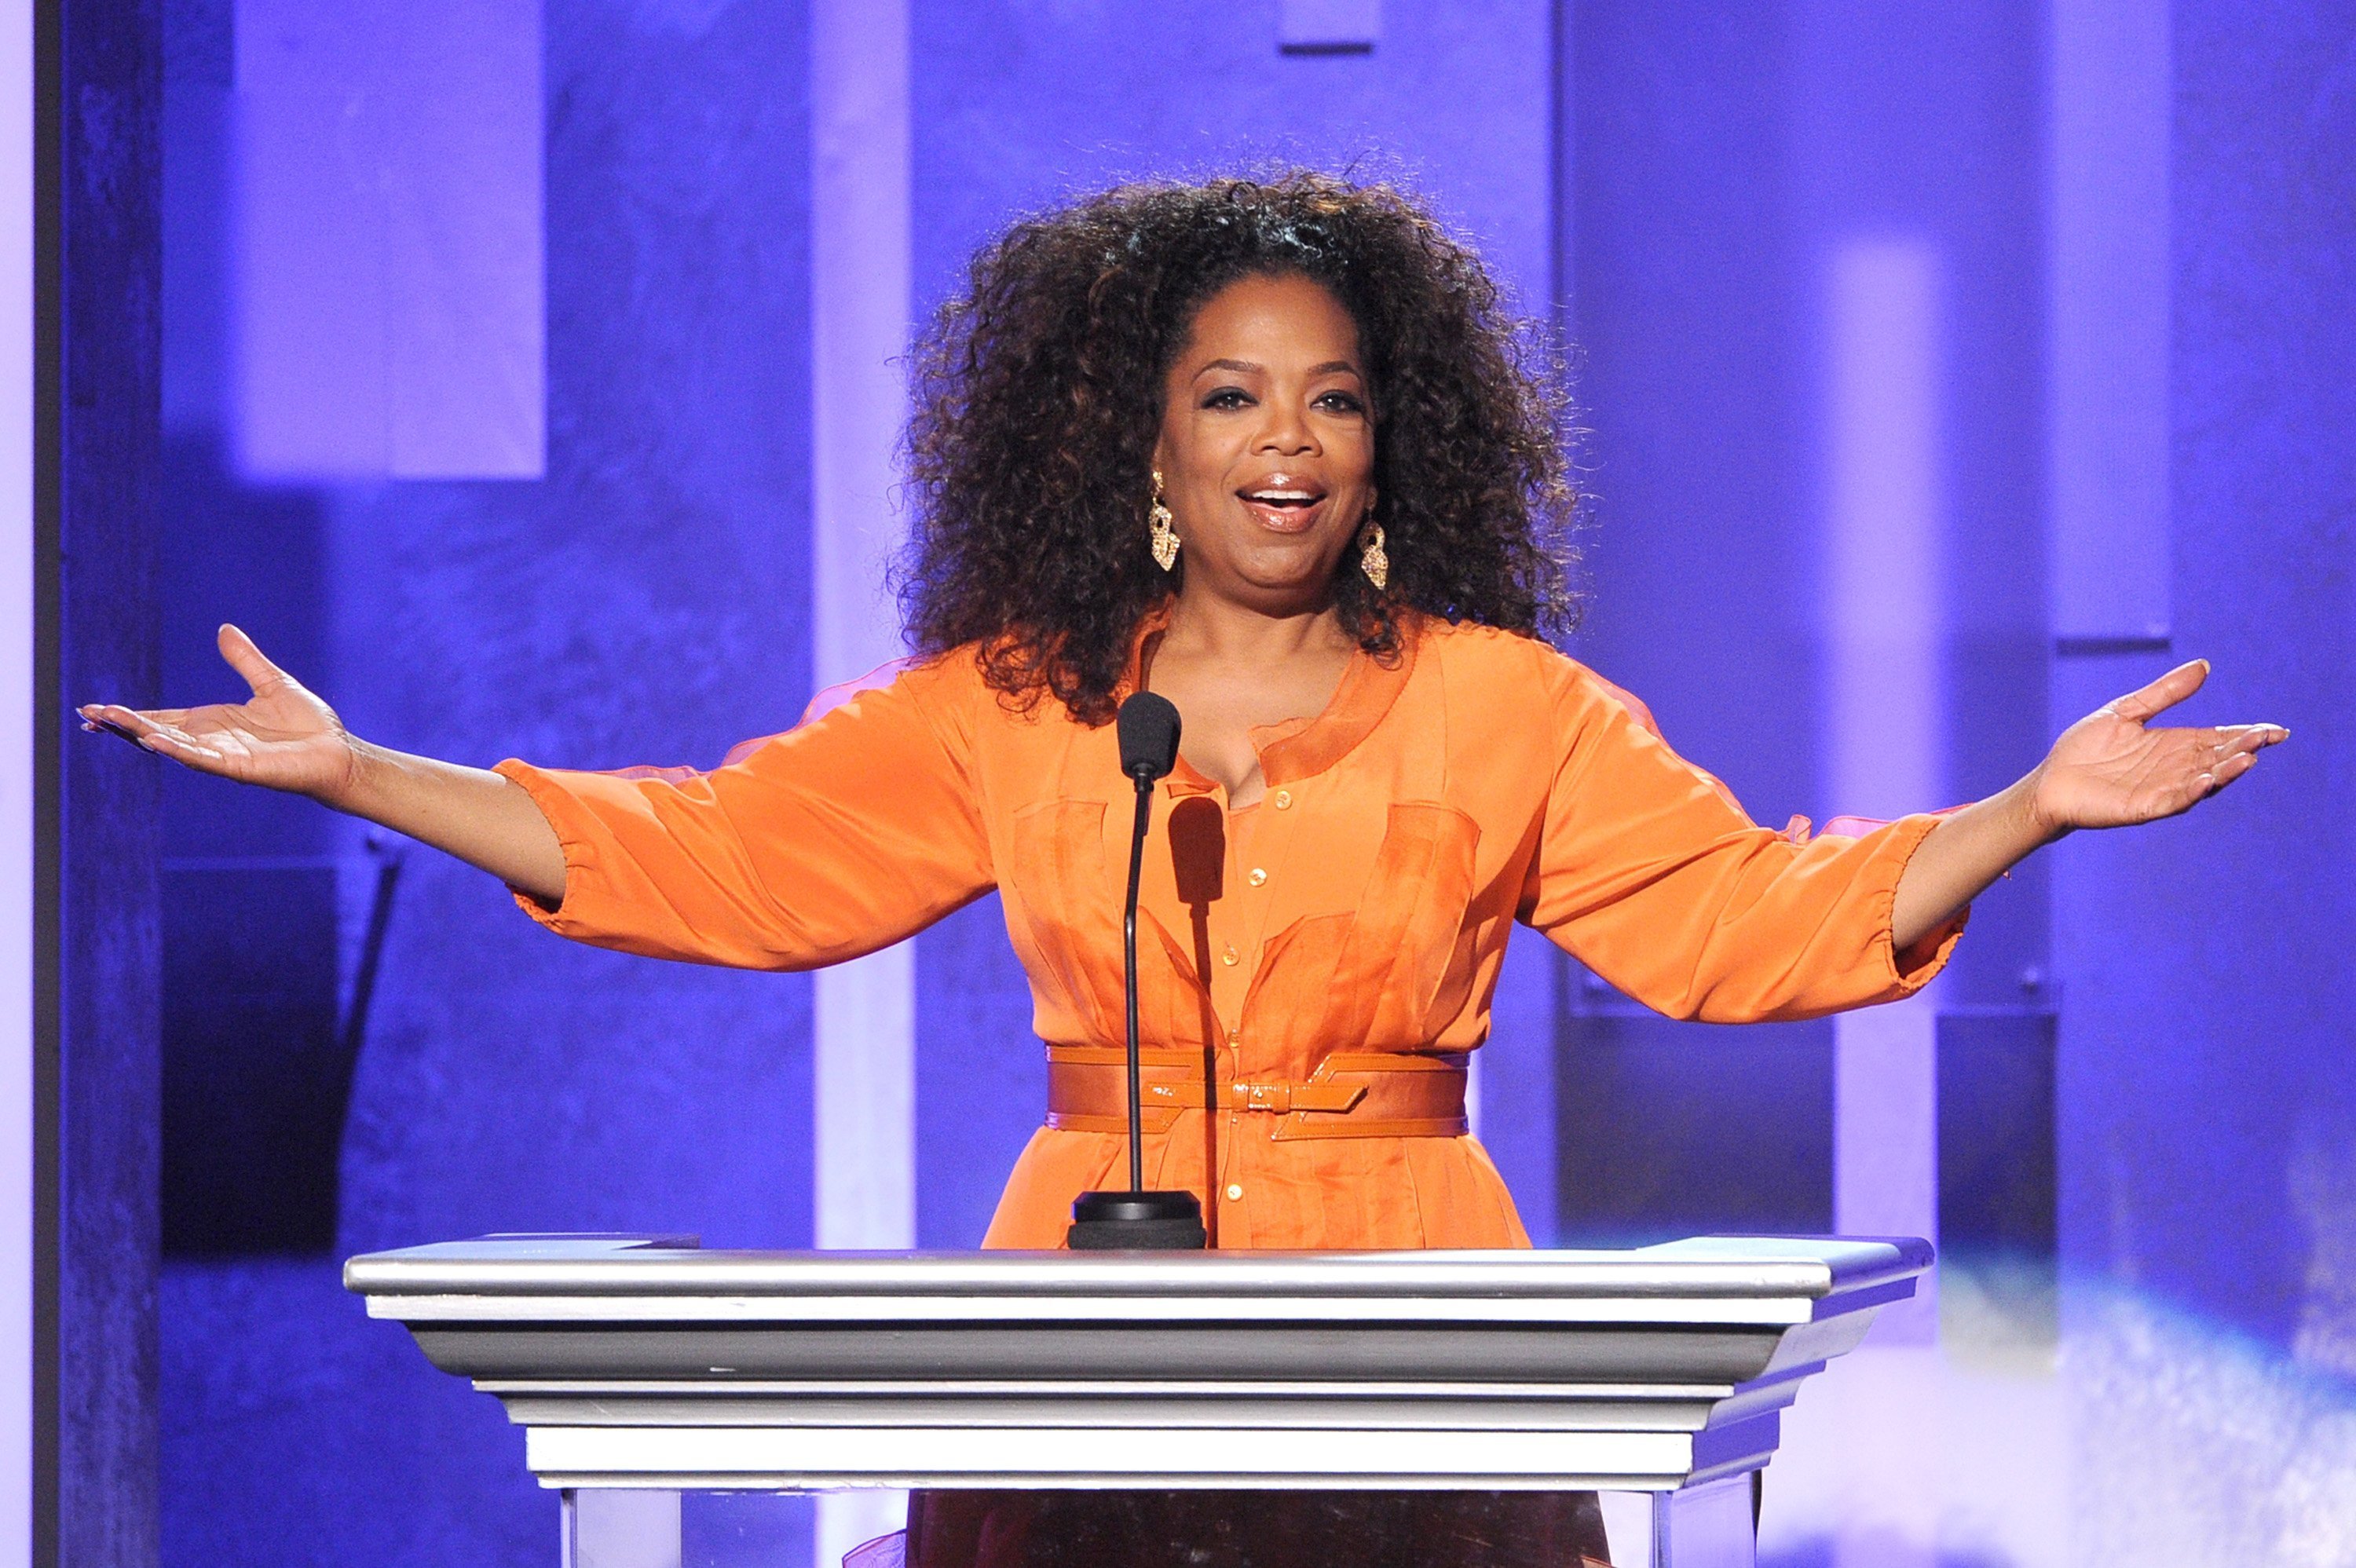  Oprah Winfrey speaking onstage during the 45th NAACP Image Awards in February 2014. | Photo: Getty Images